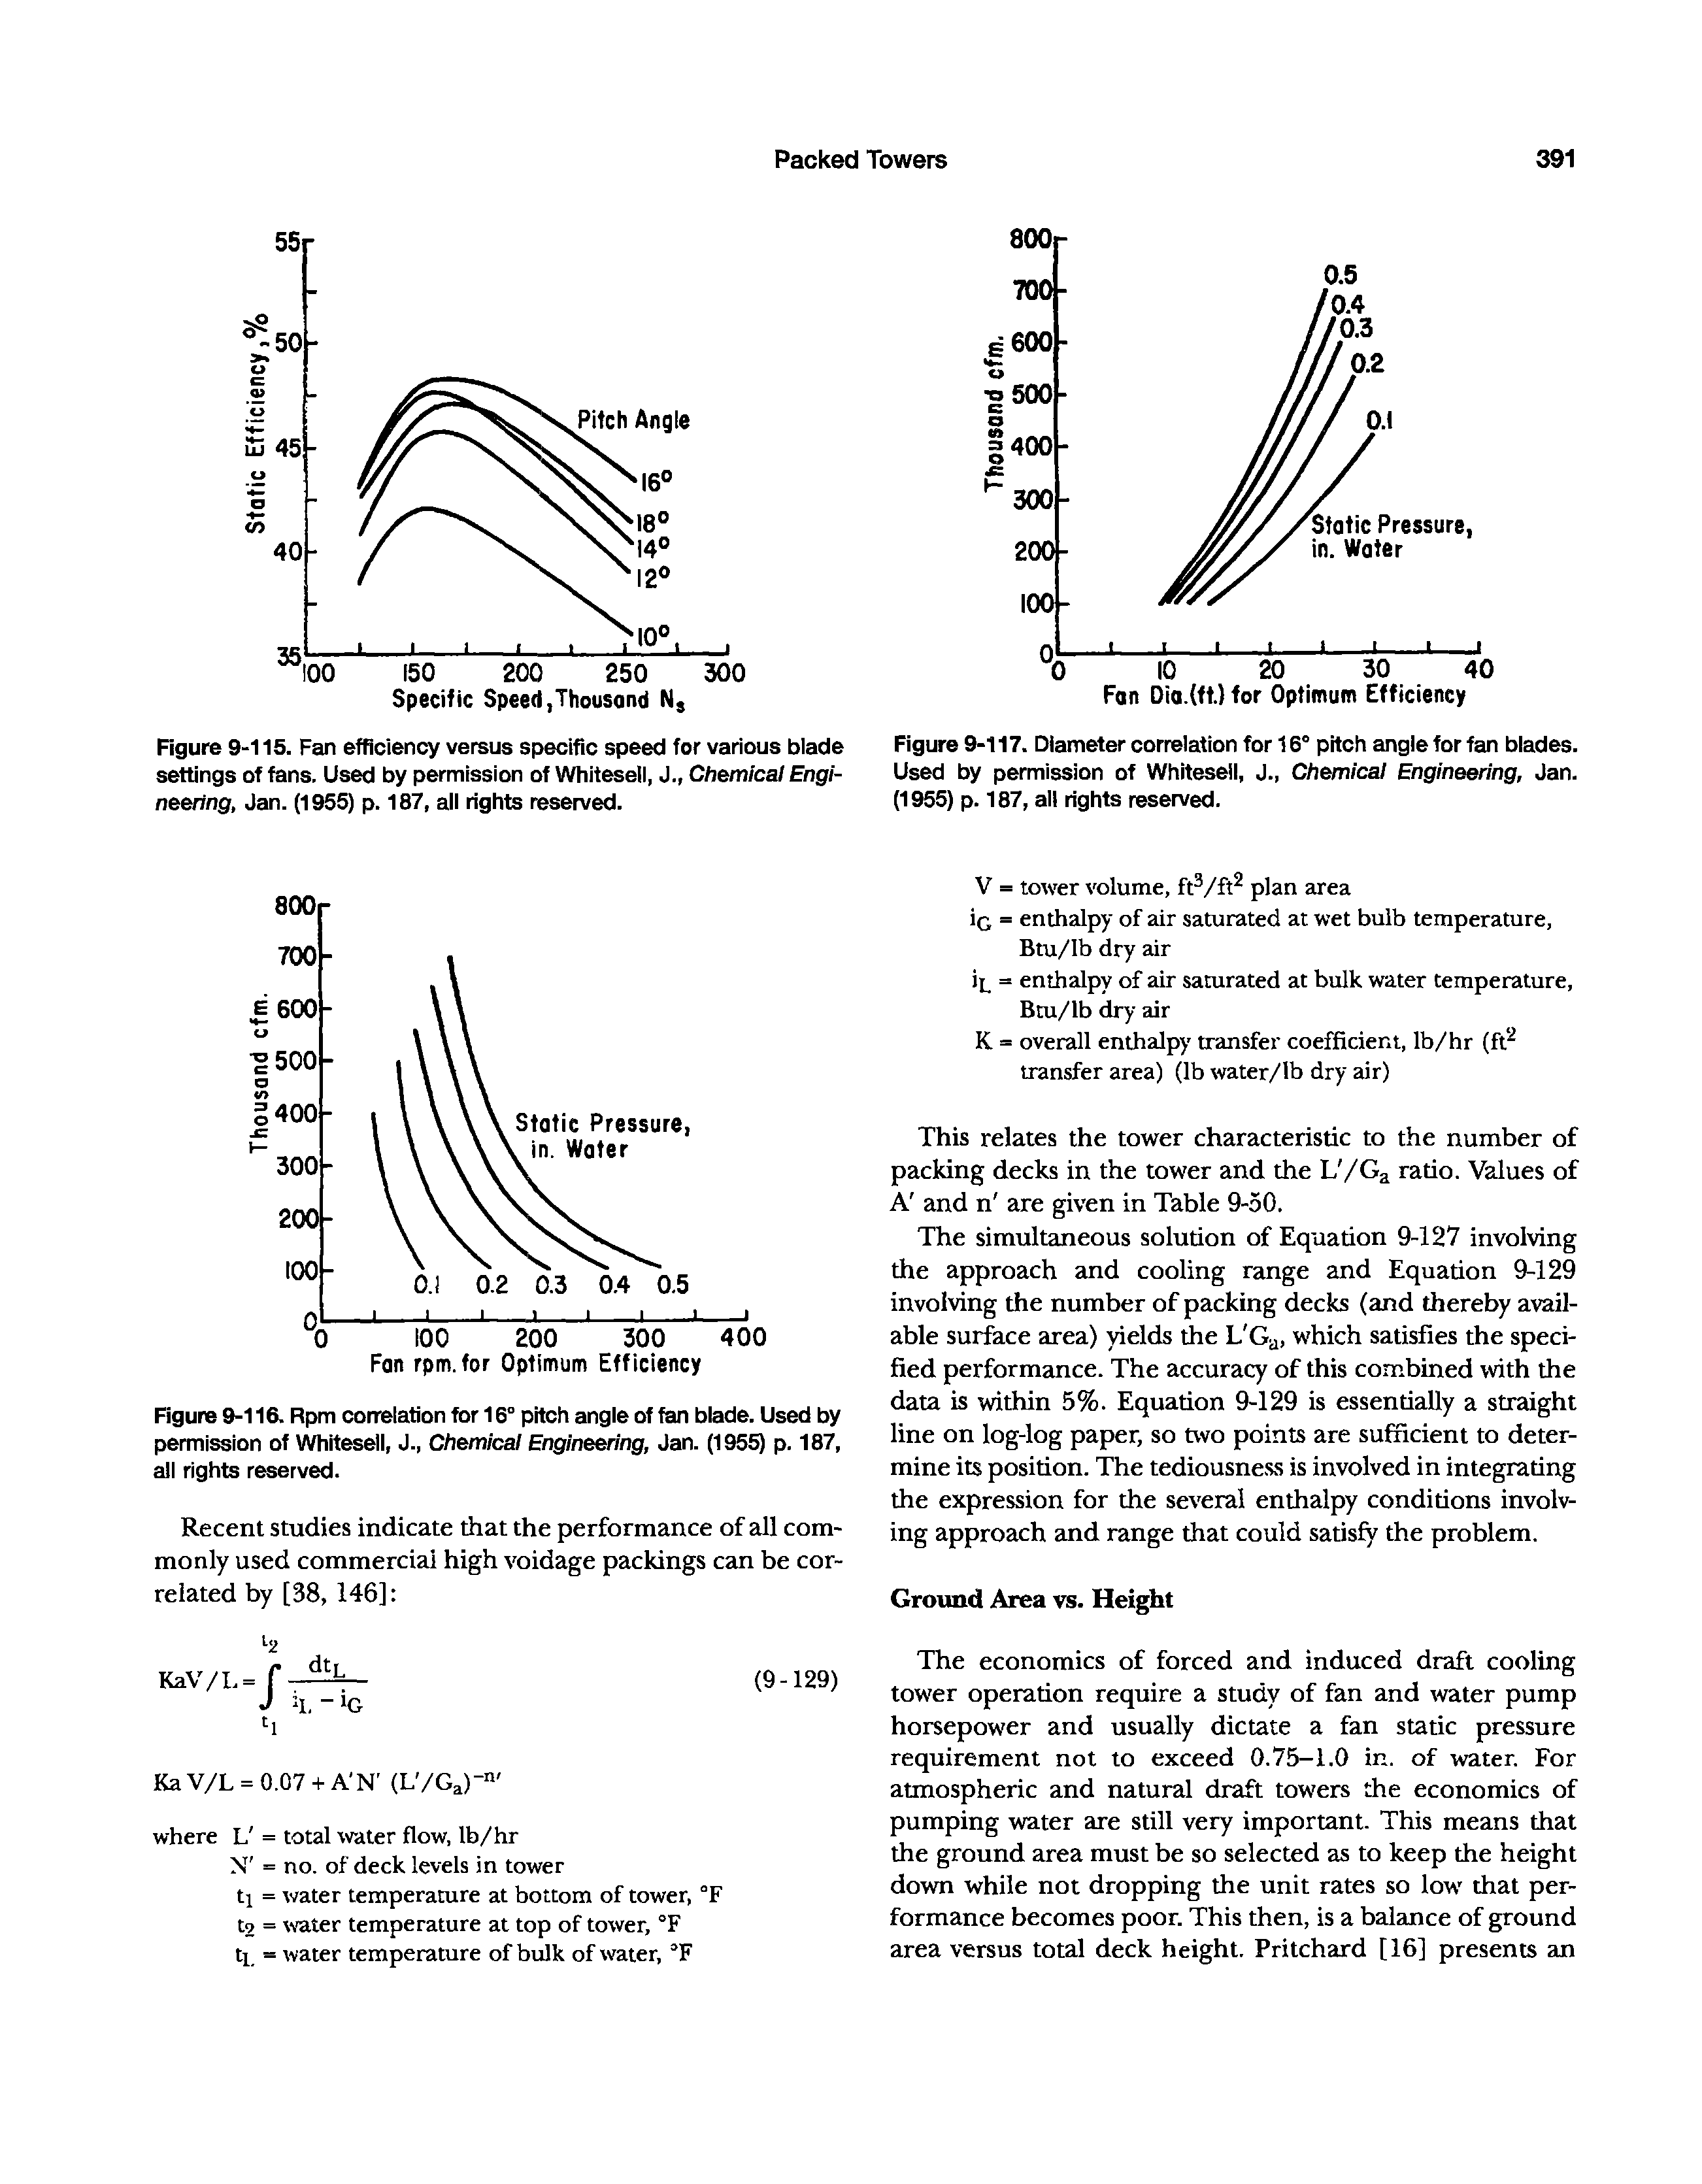 Figure 9-117. Diameter correlation for 16° pitch angle for fan blades. Used by permission of Whitesell, J., Chemical Engineering, Jan. (1955) p. 187, all rights reserved.